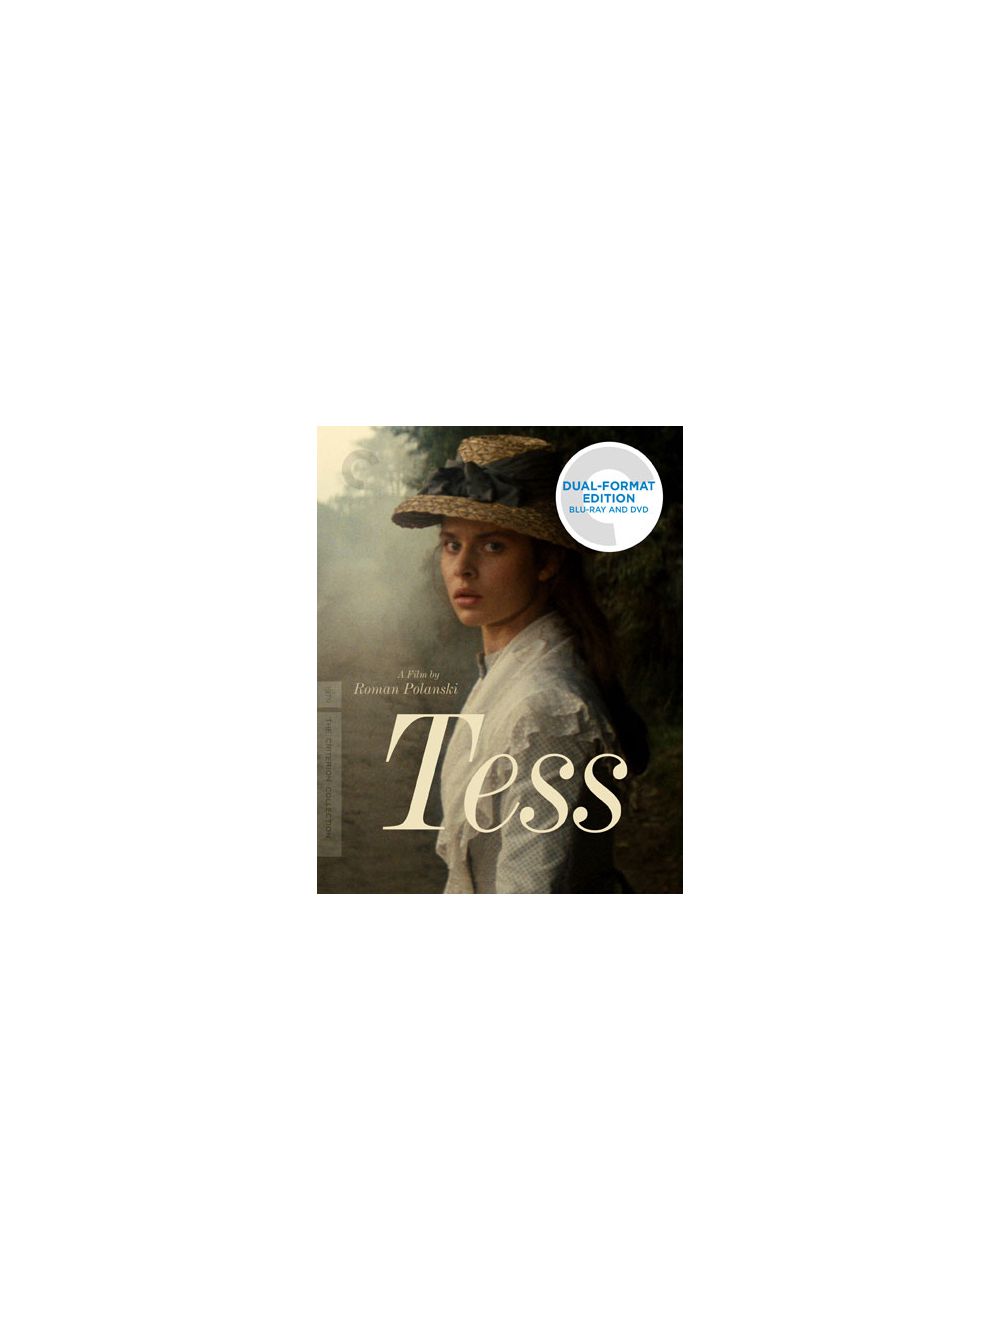 Tess (Criterion Collection) (1979) On Blu-Ray